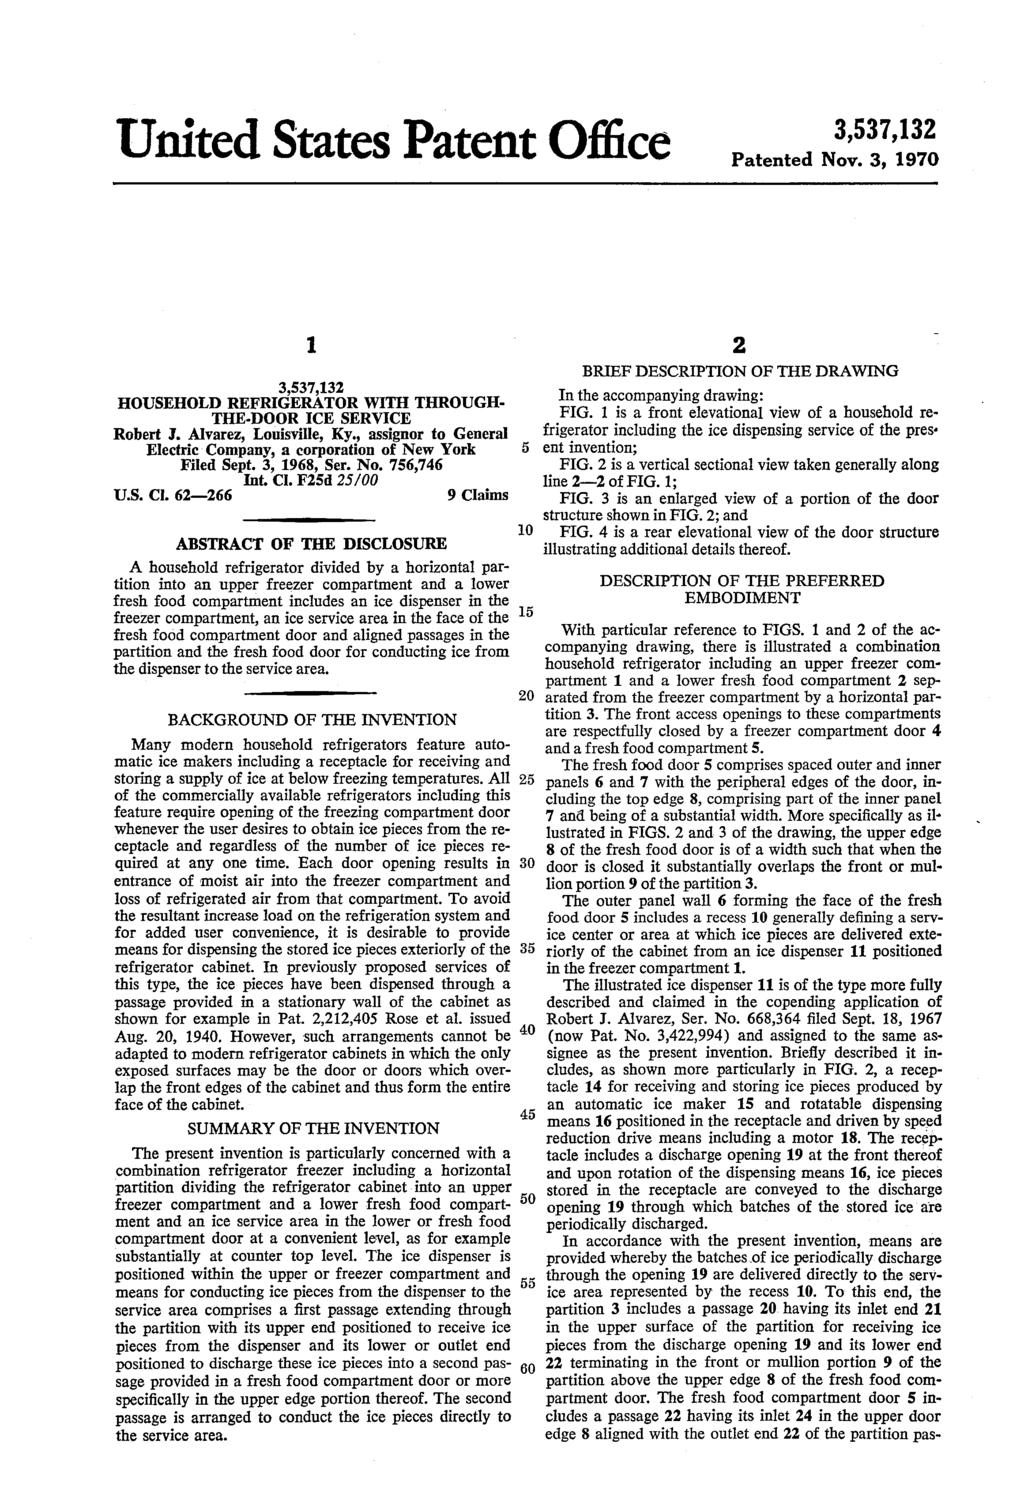 United States Patent Office Patented Nov. 3, 1970 HOUSEHOLD REFRGERATOR WITH THROUGH THE-DOOR CE SERVICE Robert J. Alvarez, Louisville, Ky.